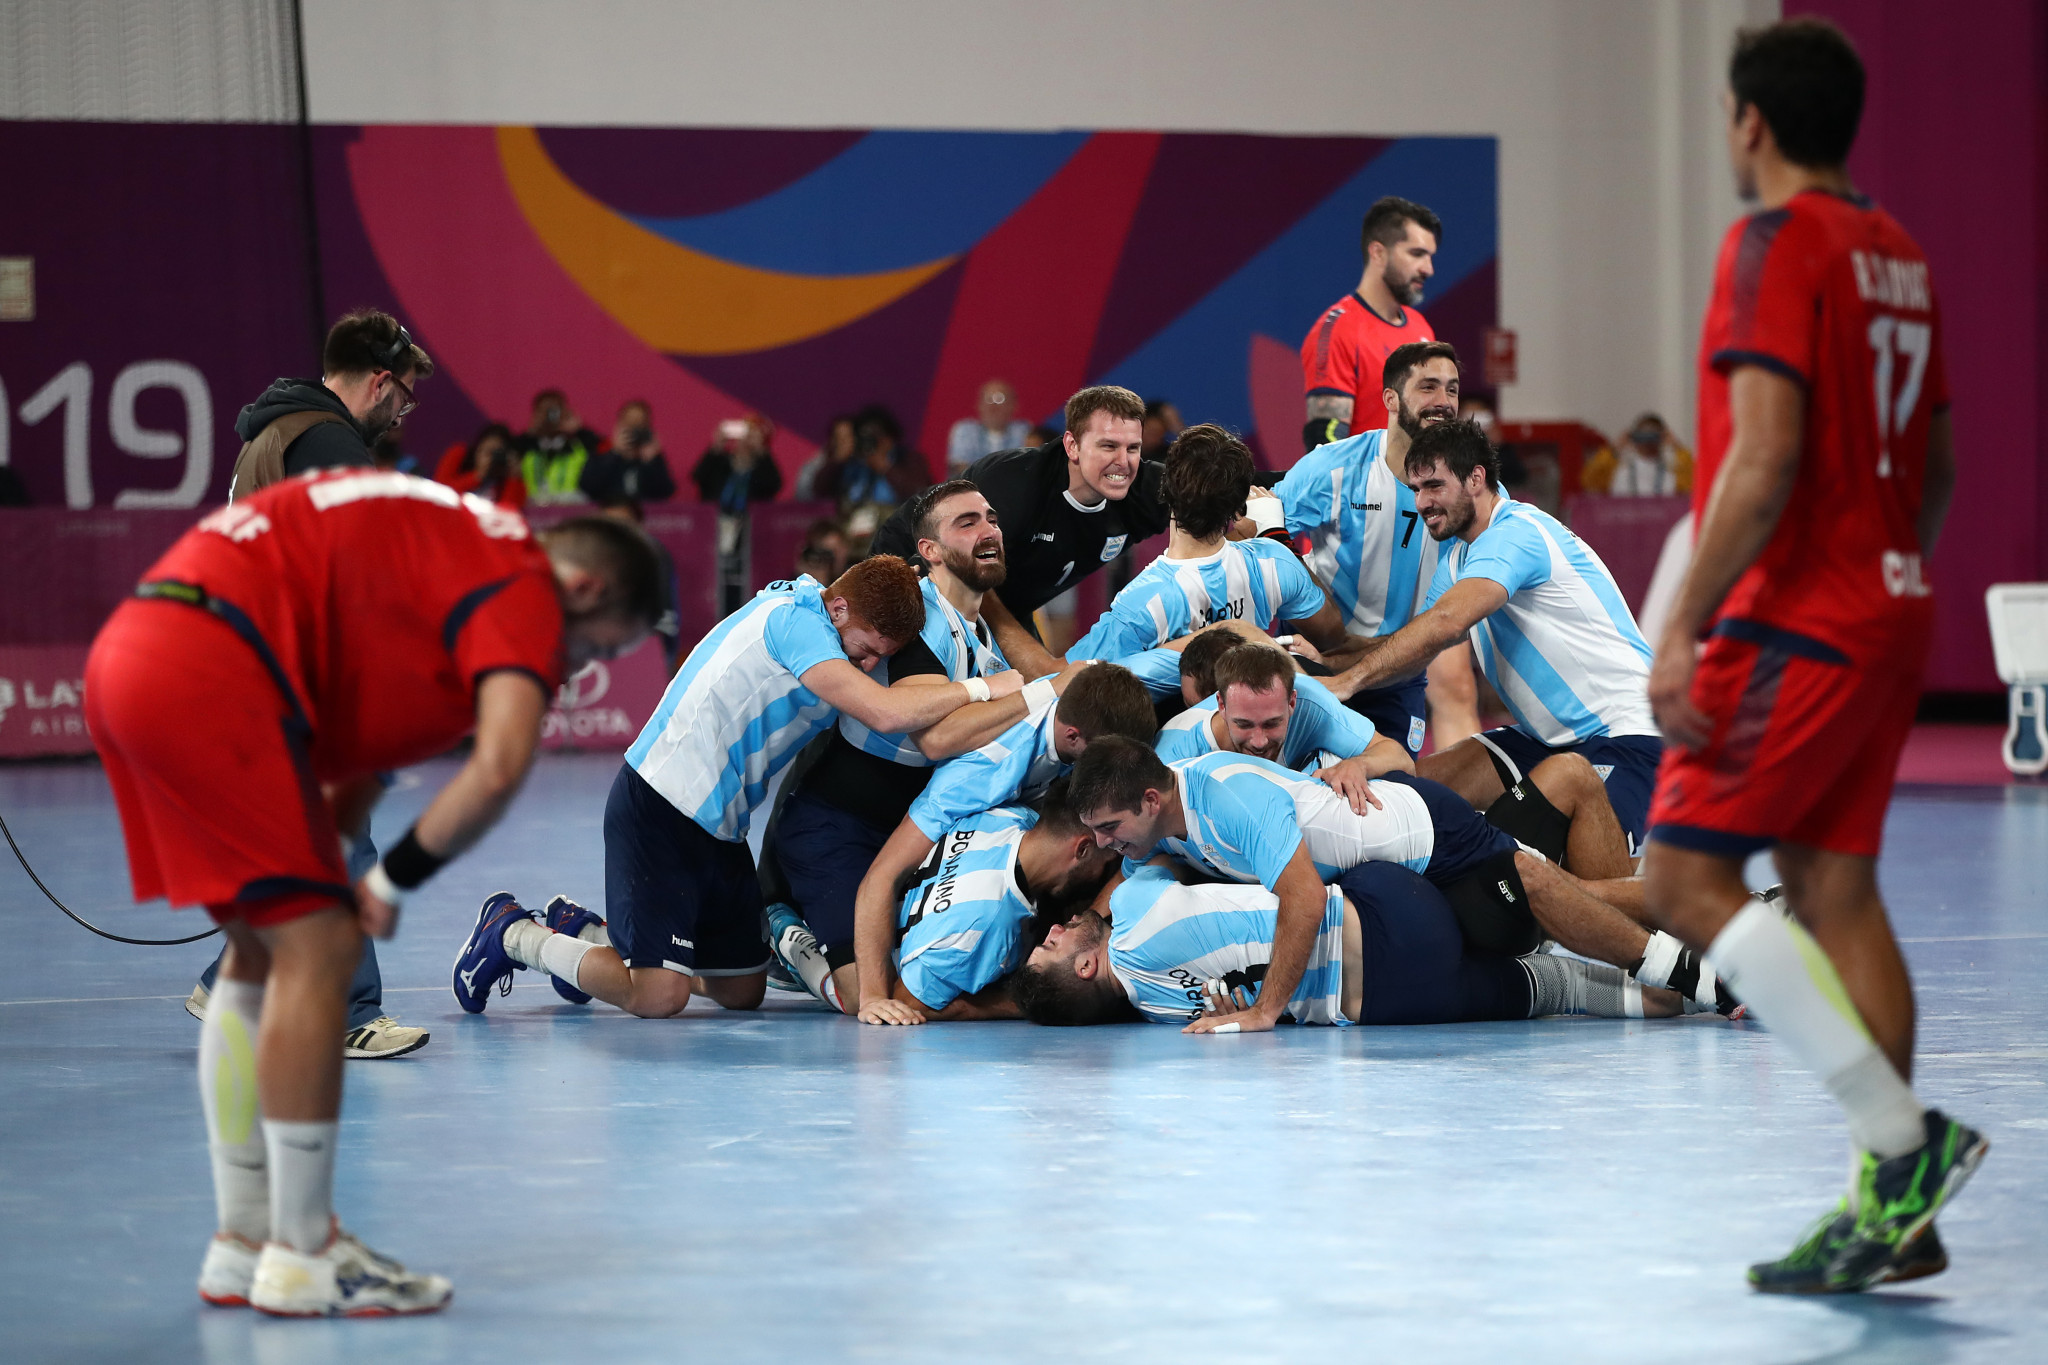 Argentina earned a place at the Tokyo 2020 Olympics with a narrow men's handball victory at Lima 2019 ©Lima 2019